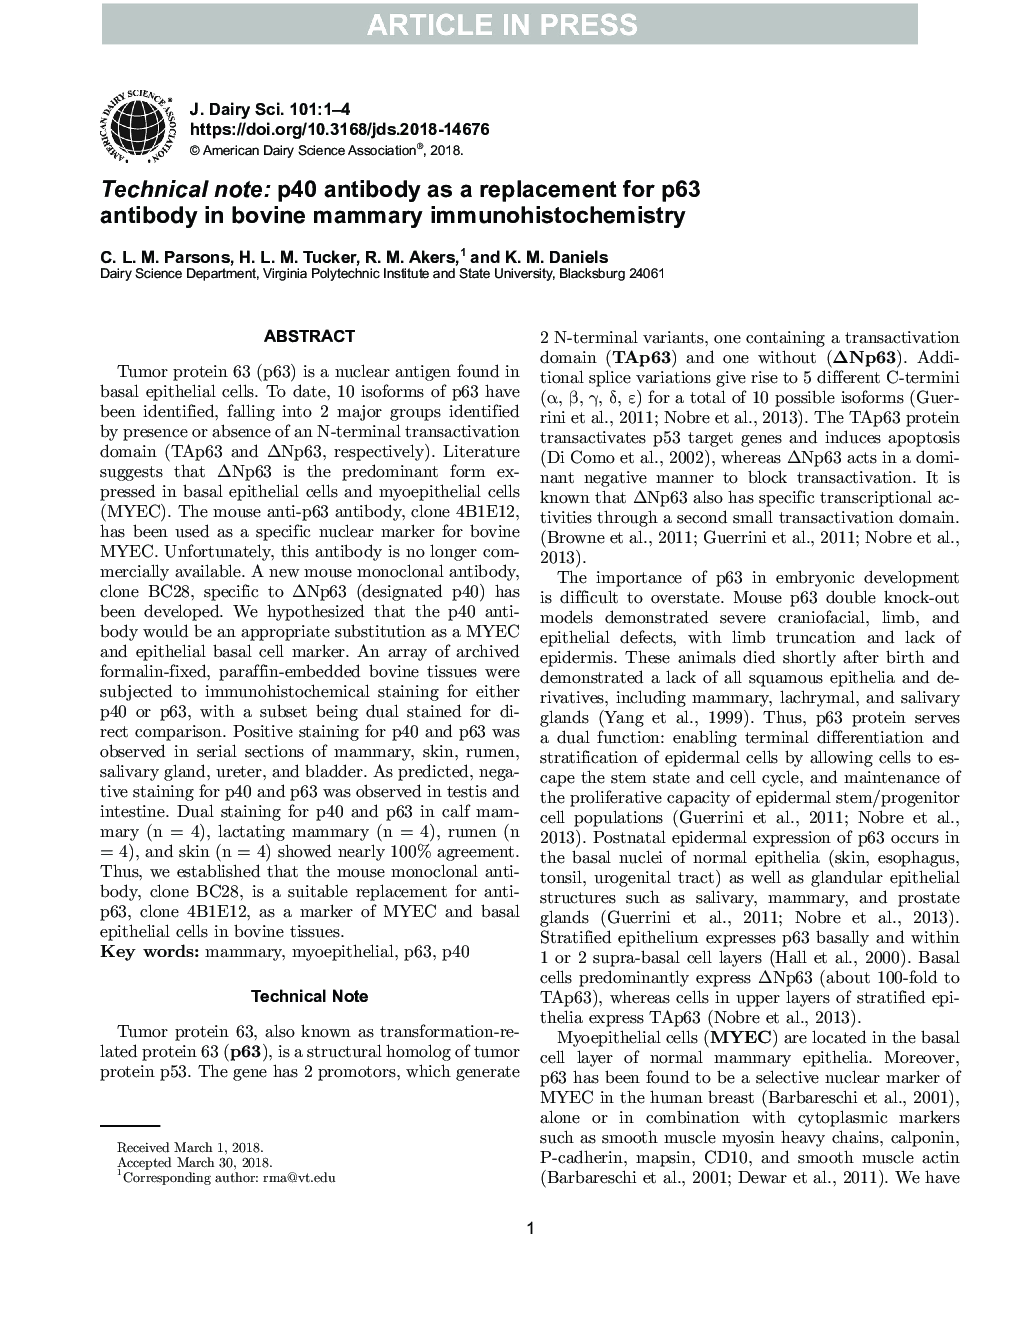 Technical note: p40 antibody as a replacement for p63 antibody in bovine mammary immunohistochemistry